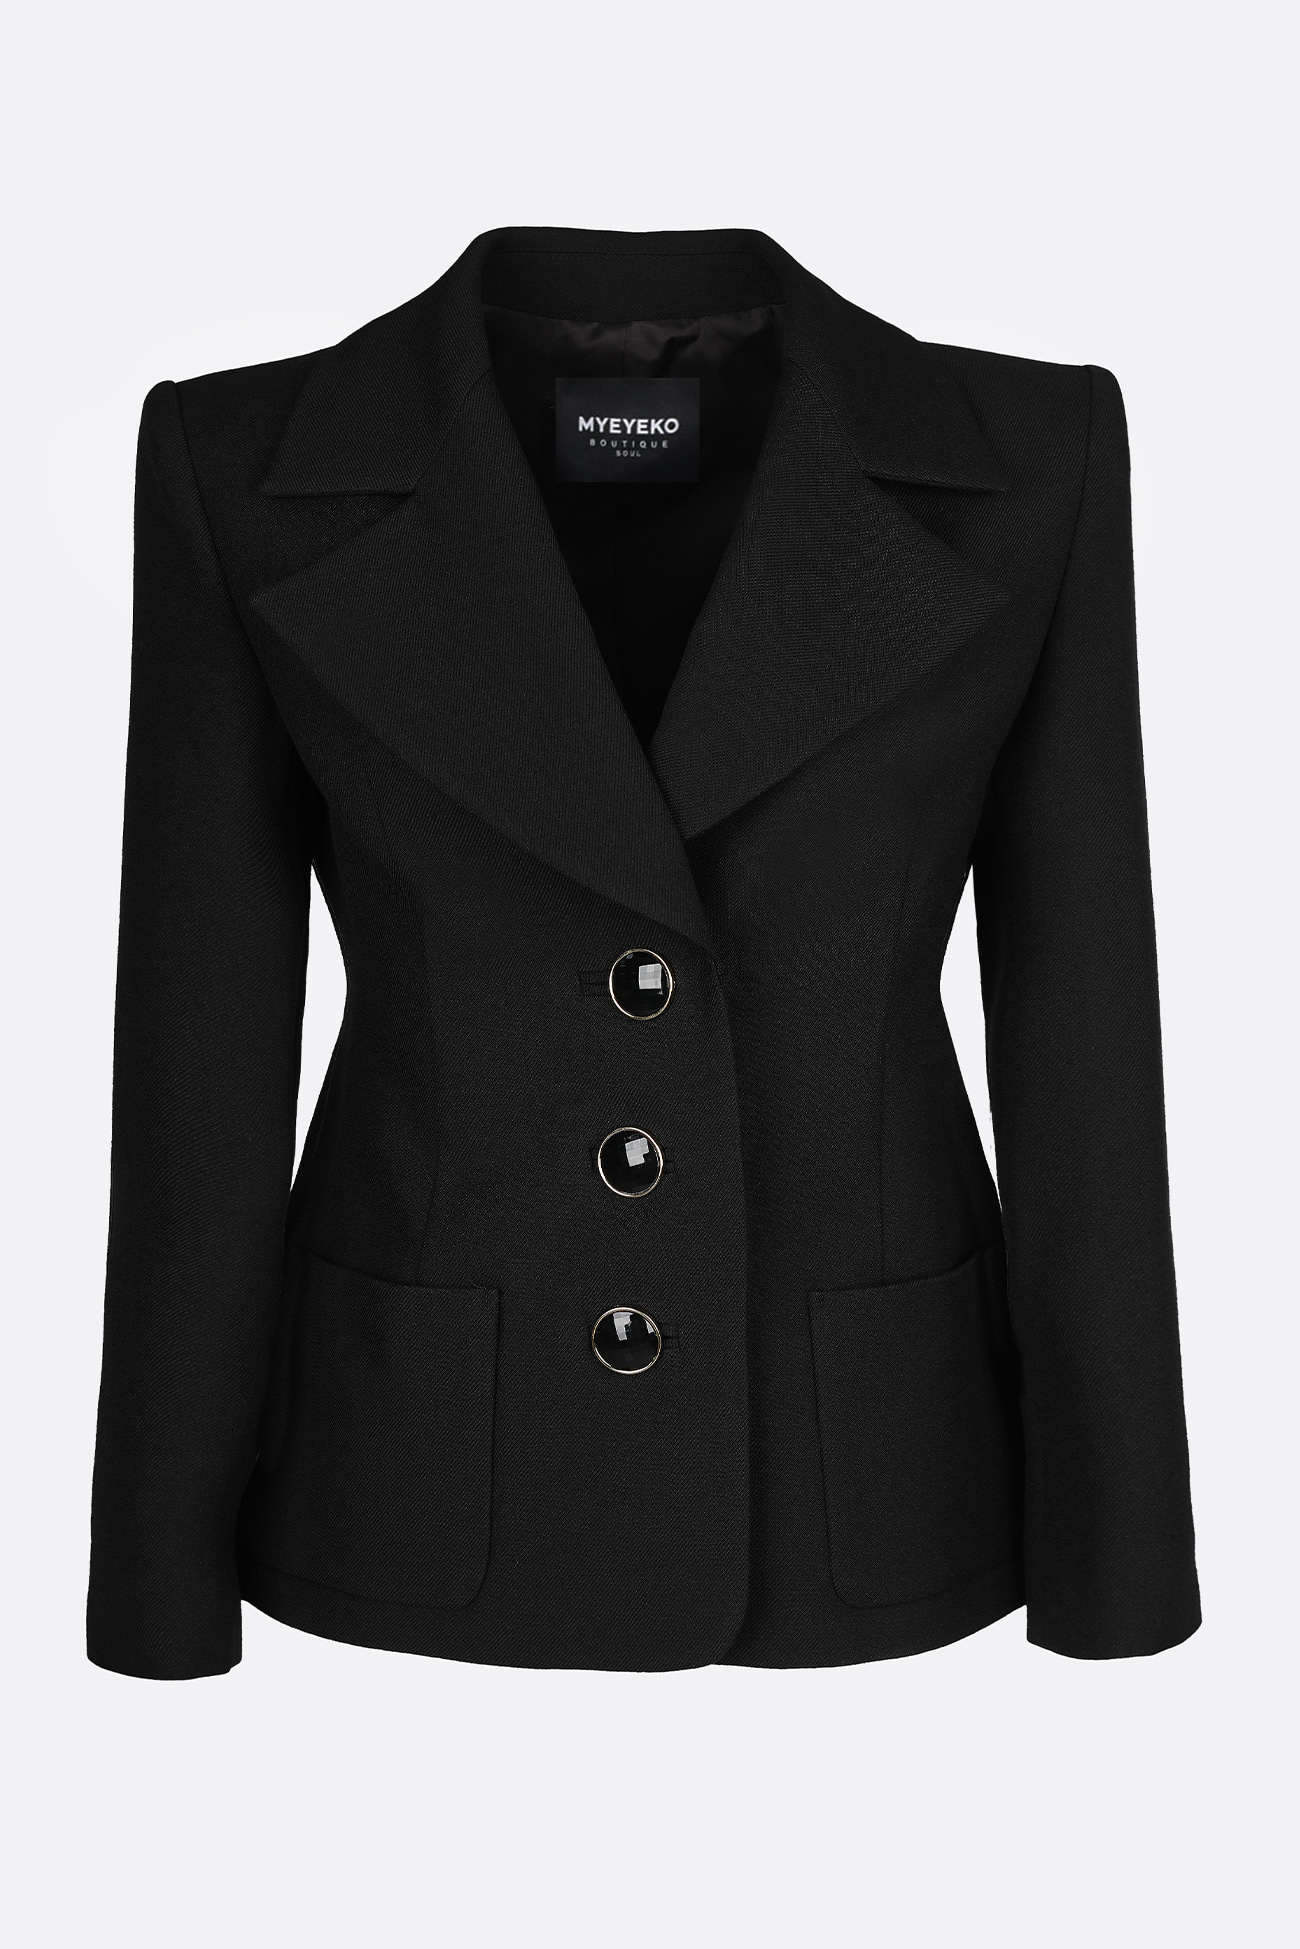 HIGH QUALITY LINE - Roped-Shoulder VIRGIN WOOL BLACK JACKET (by Style M. Made in JAPAN)